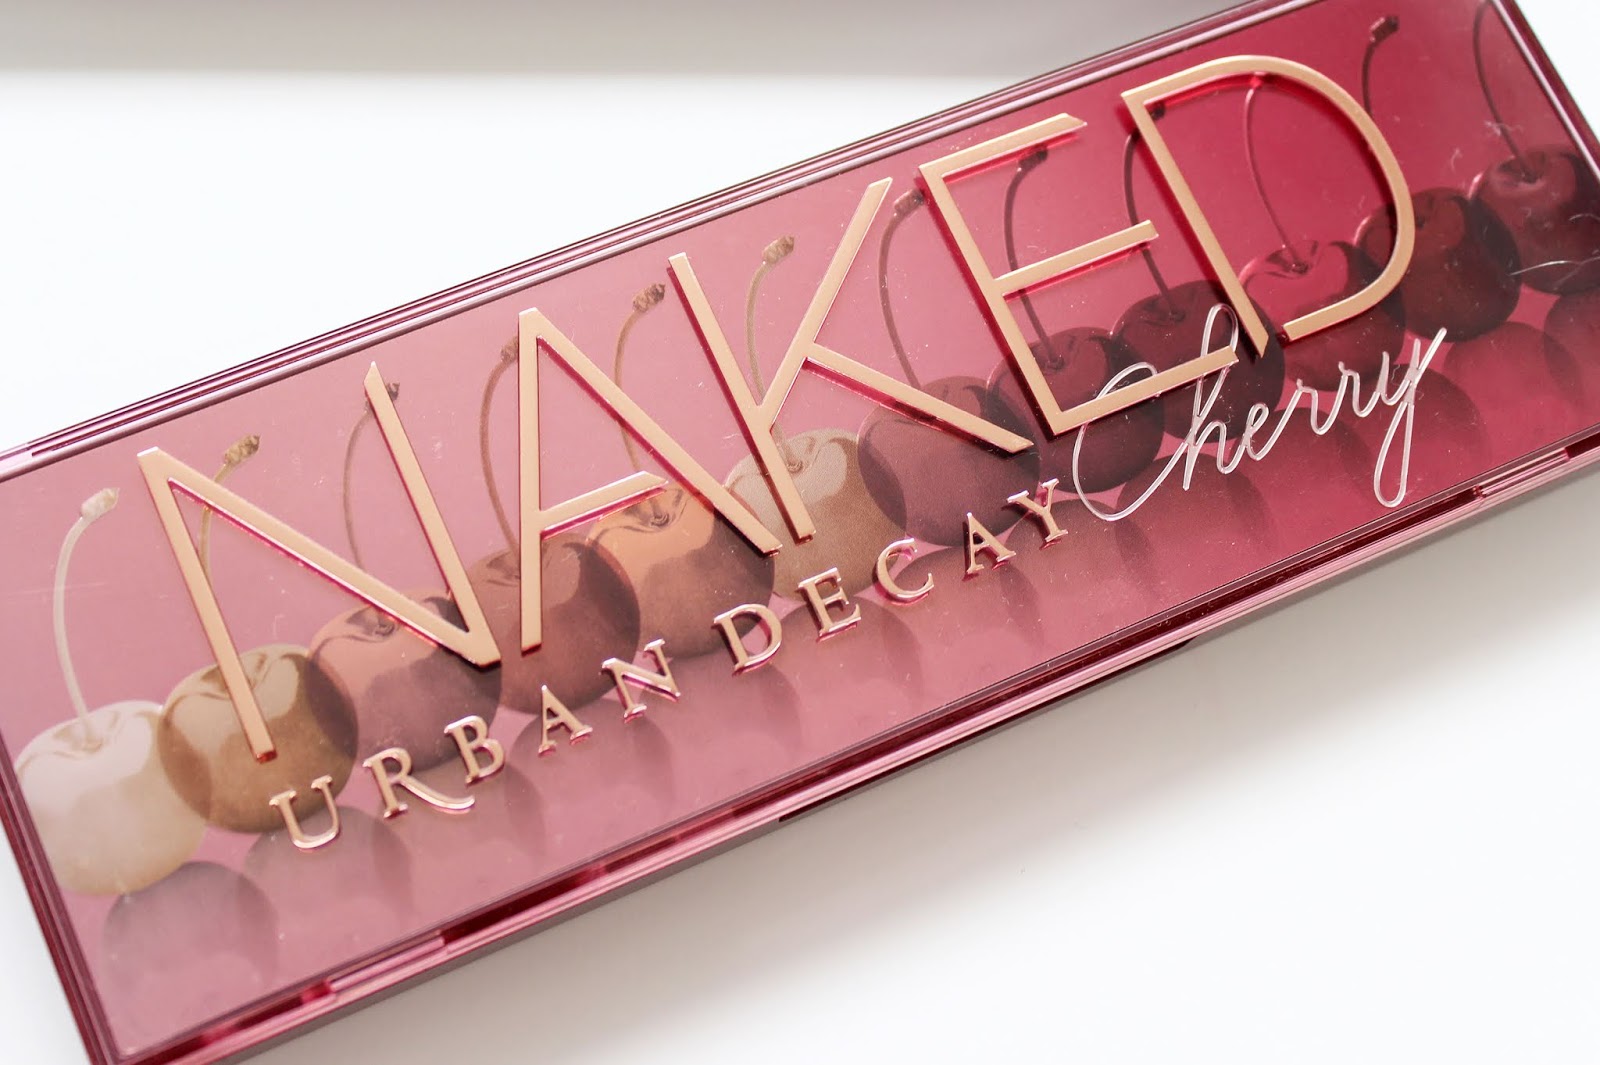 URBAN DECAY | Naked Cherry Palette - Review + Swatches - CassandraMyee